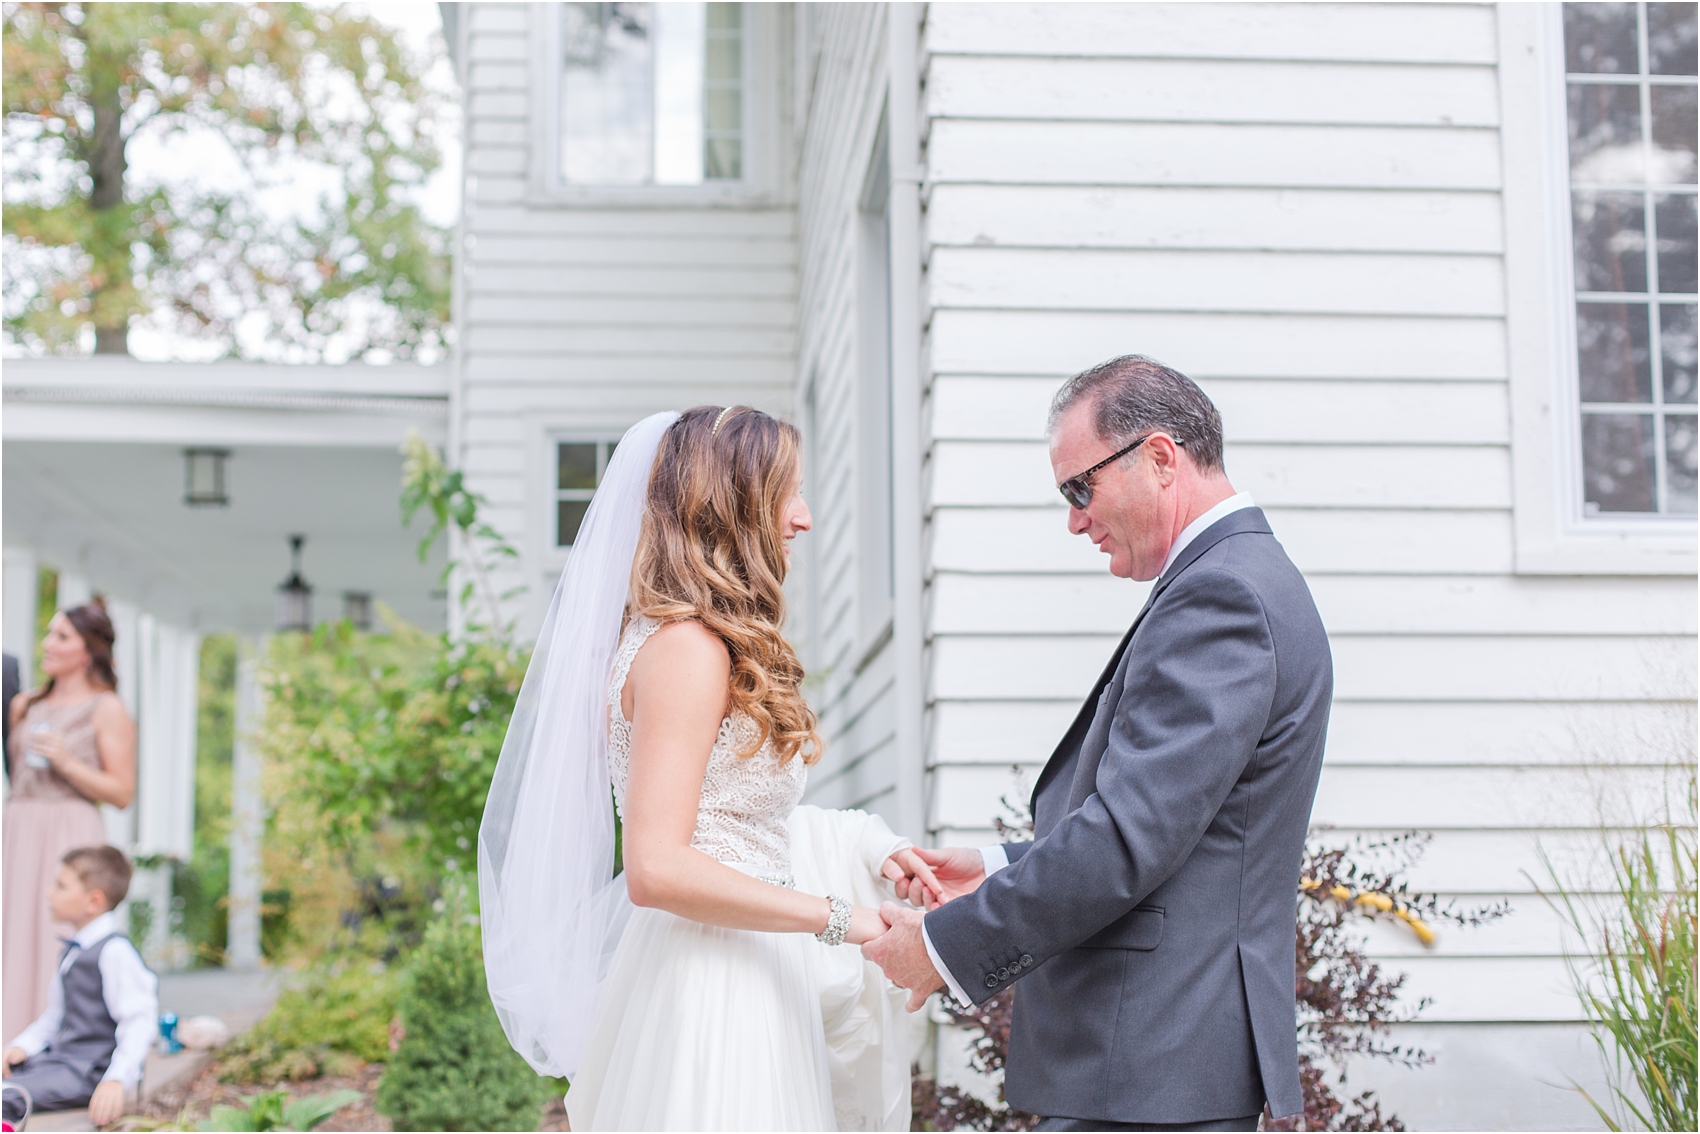 father-and-bride-share-emotional-first-look-on-wedding-day-photos-in-detroit-michigan-by-courtney-carolyn-photography_0064.jpg